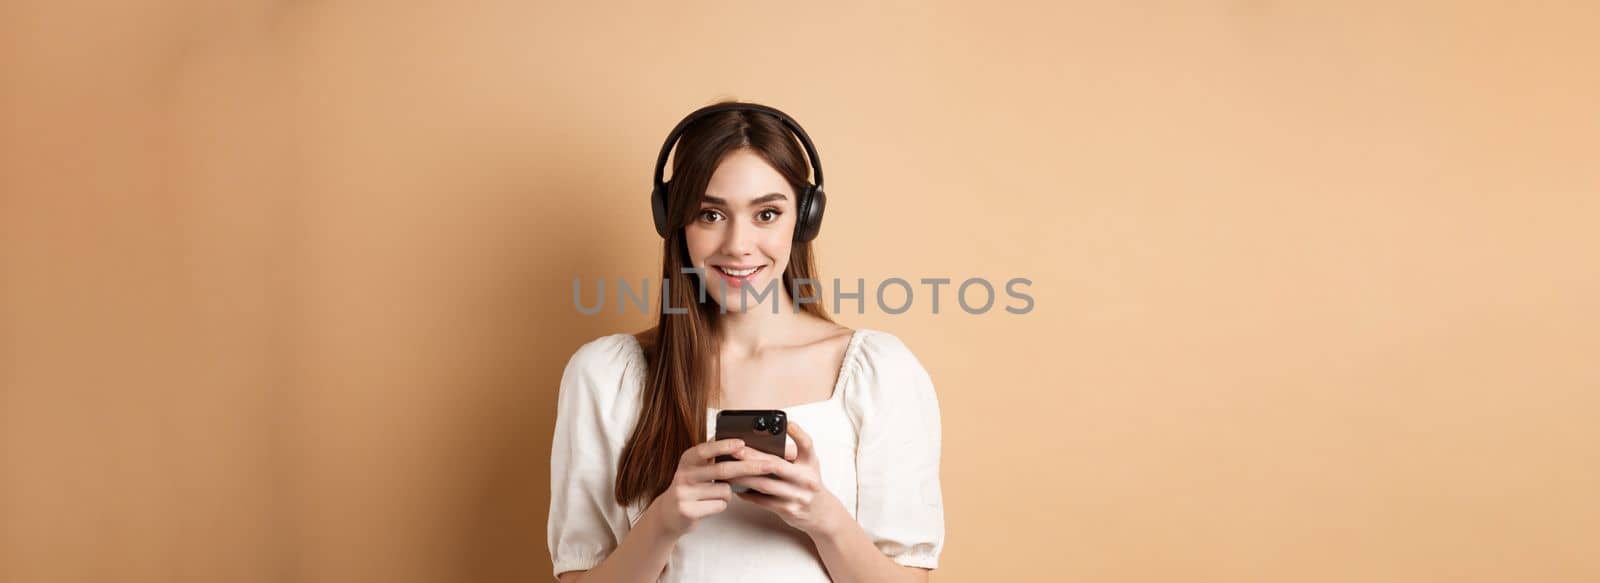 Pretty girl in headphones smiling at camera, listening music and using mobile phone app, beige background.